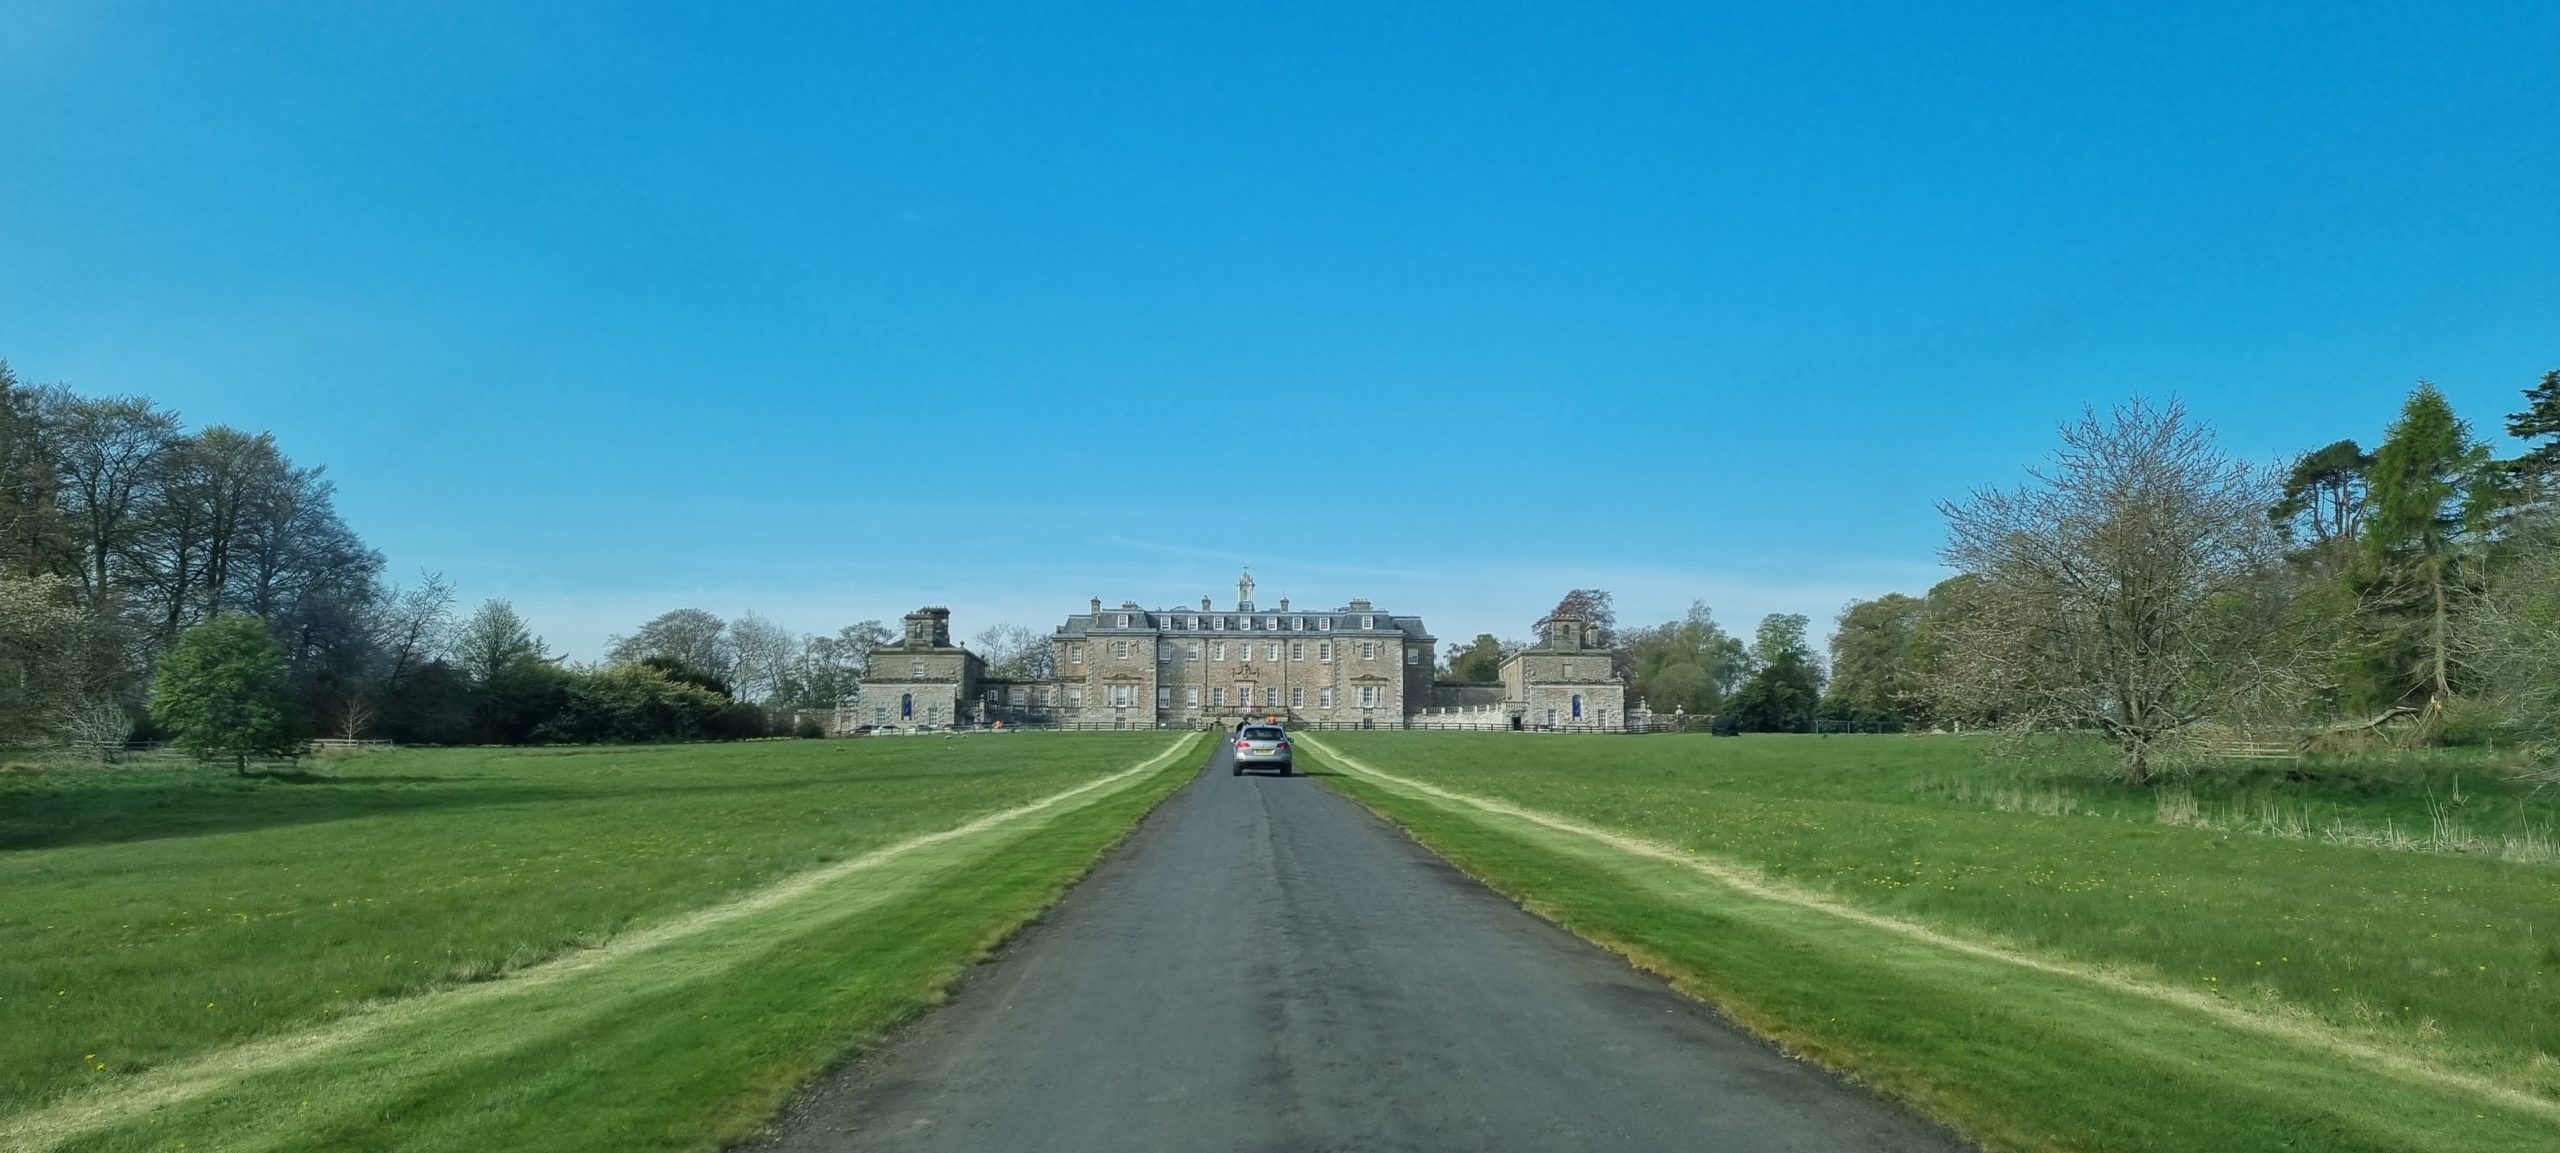 Marchmont House, the longest drive in Scotland